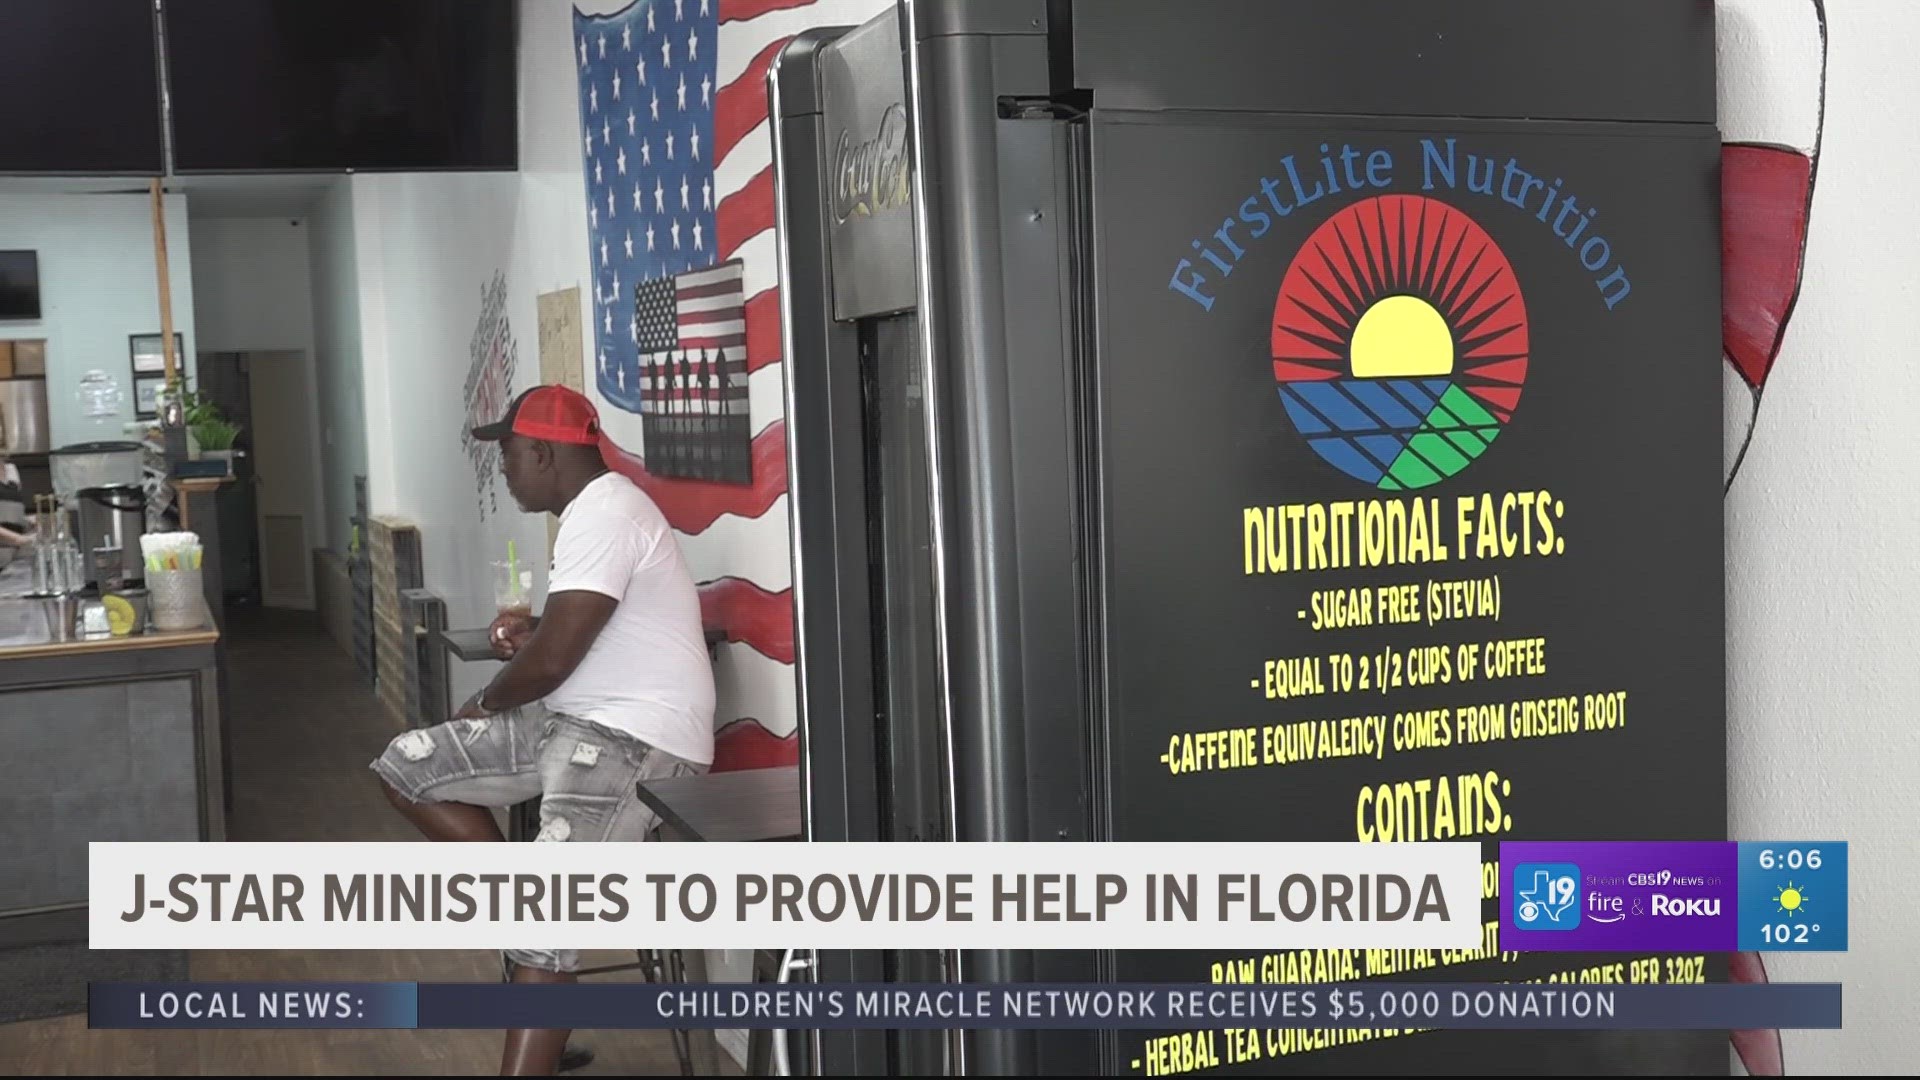 Patrick Johnson, the founder of J-Star Ministries, is collecting water, food items, and cleaning supplies to help those affected by the storm.